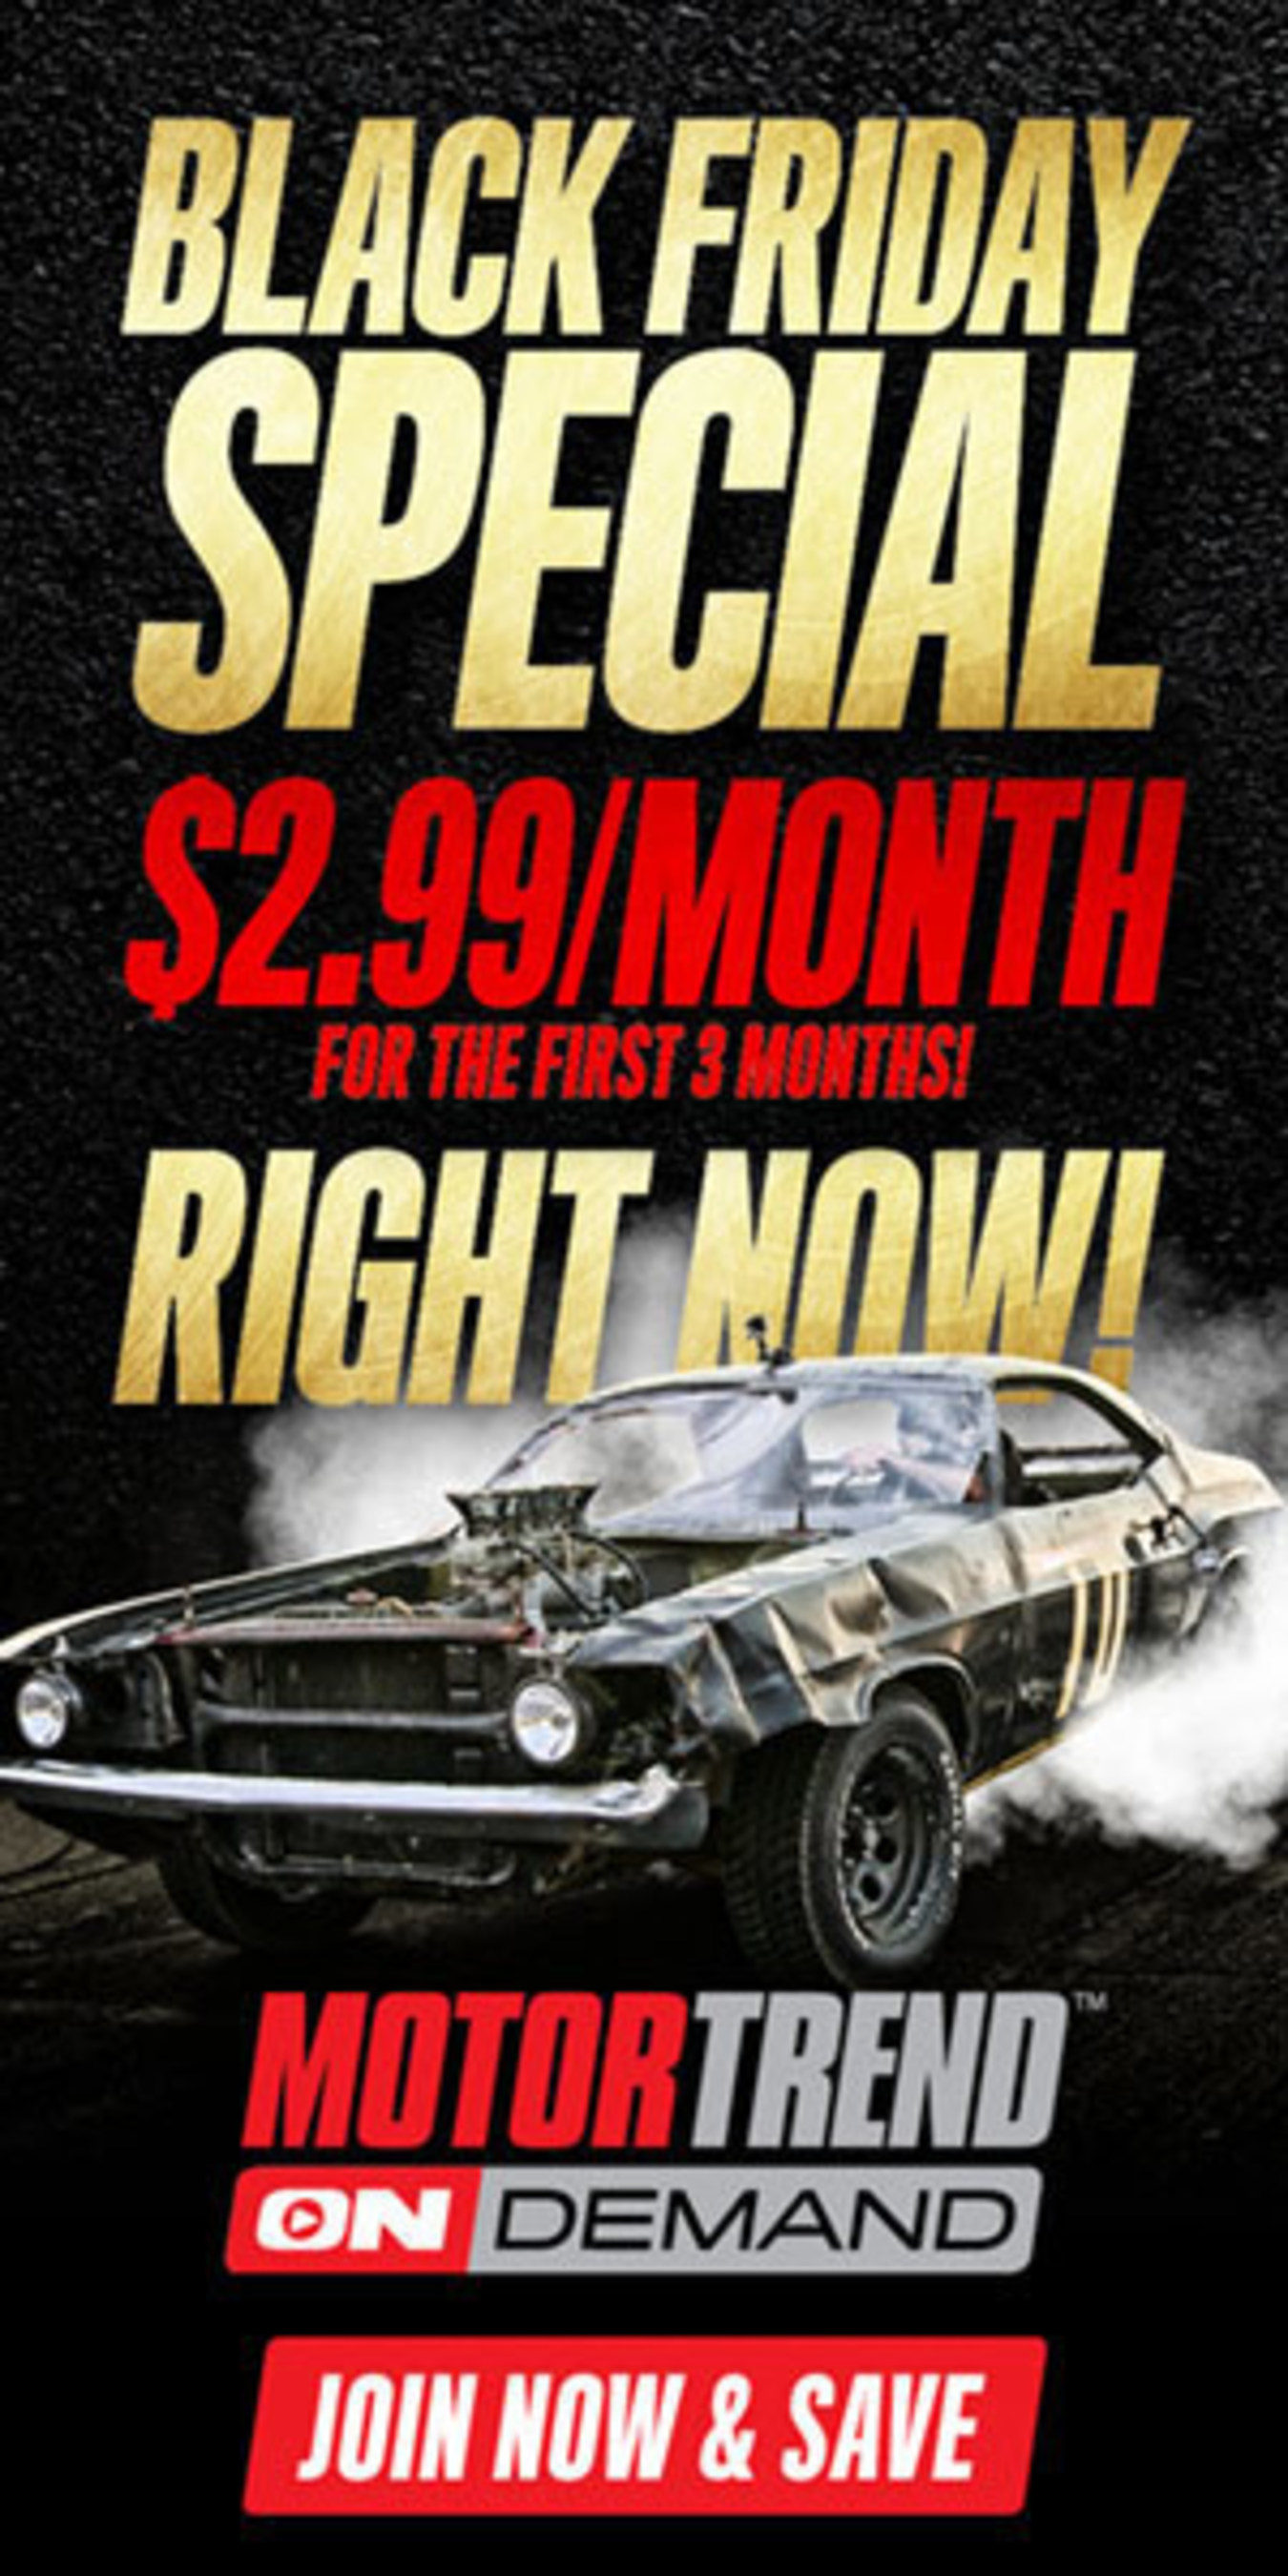 Motor Trend OnDemand Black Friday Special starts right now at $2.99/month for the first three months